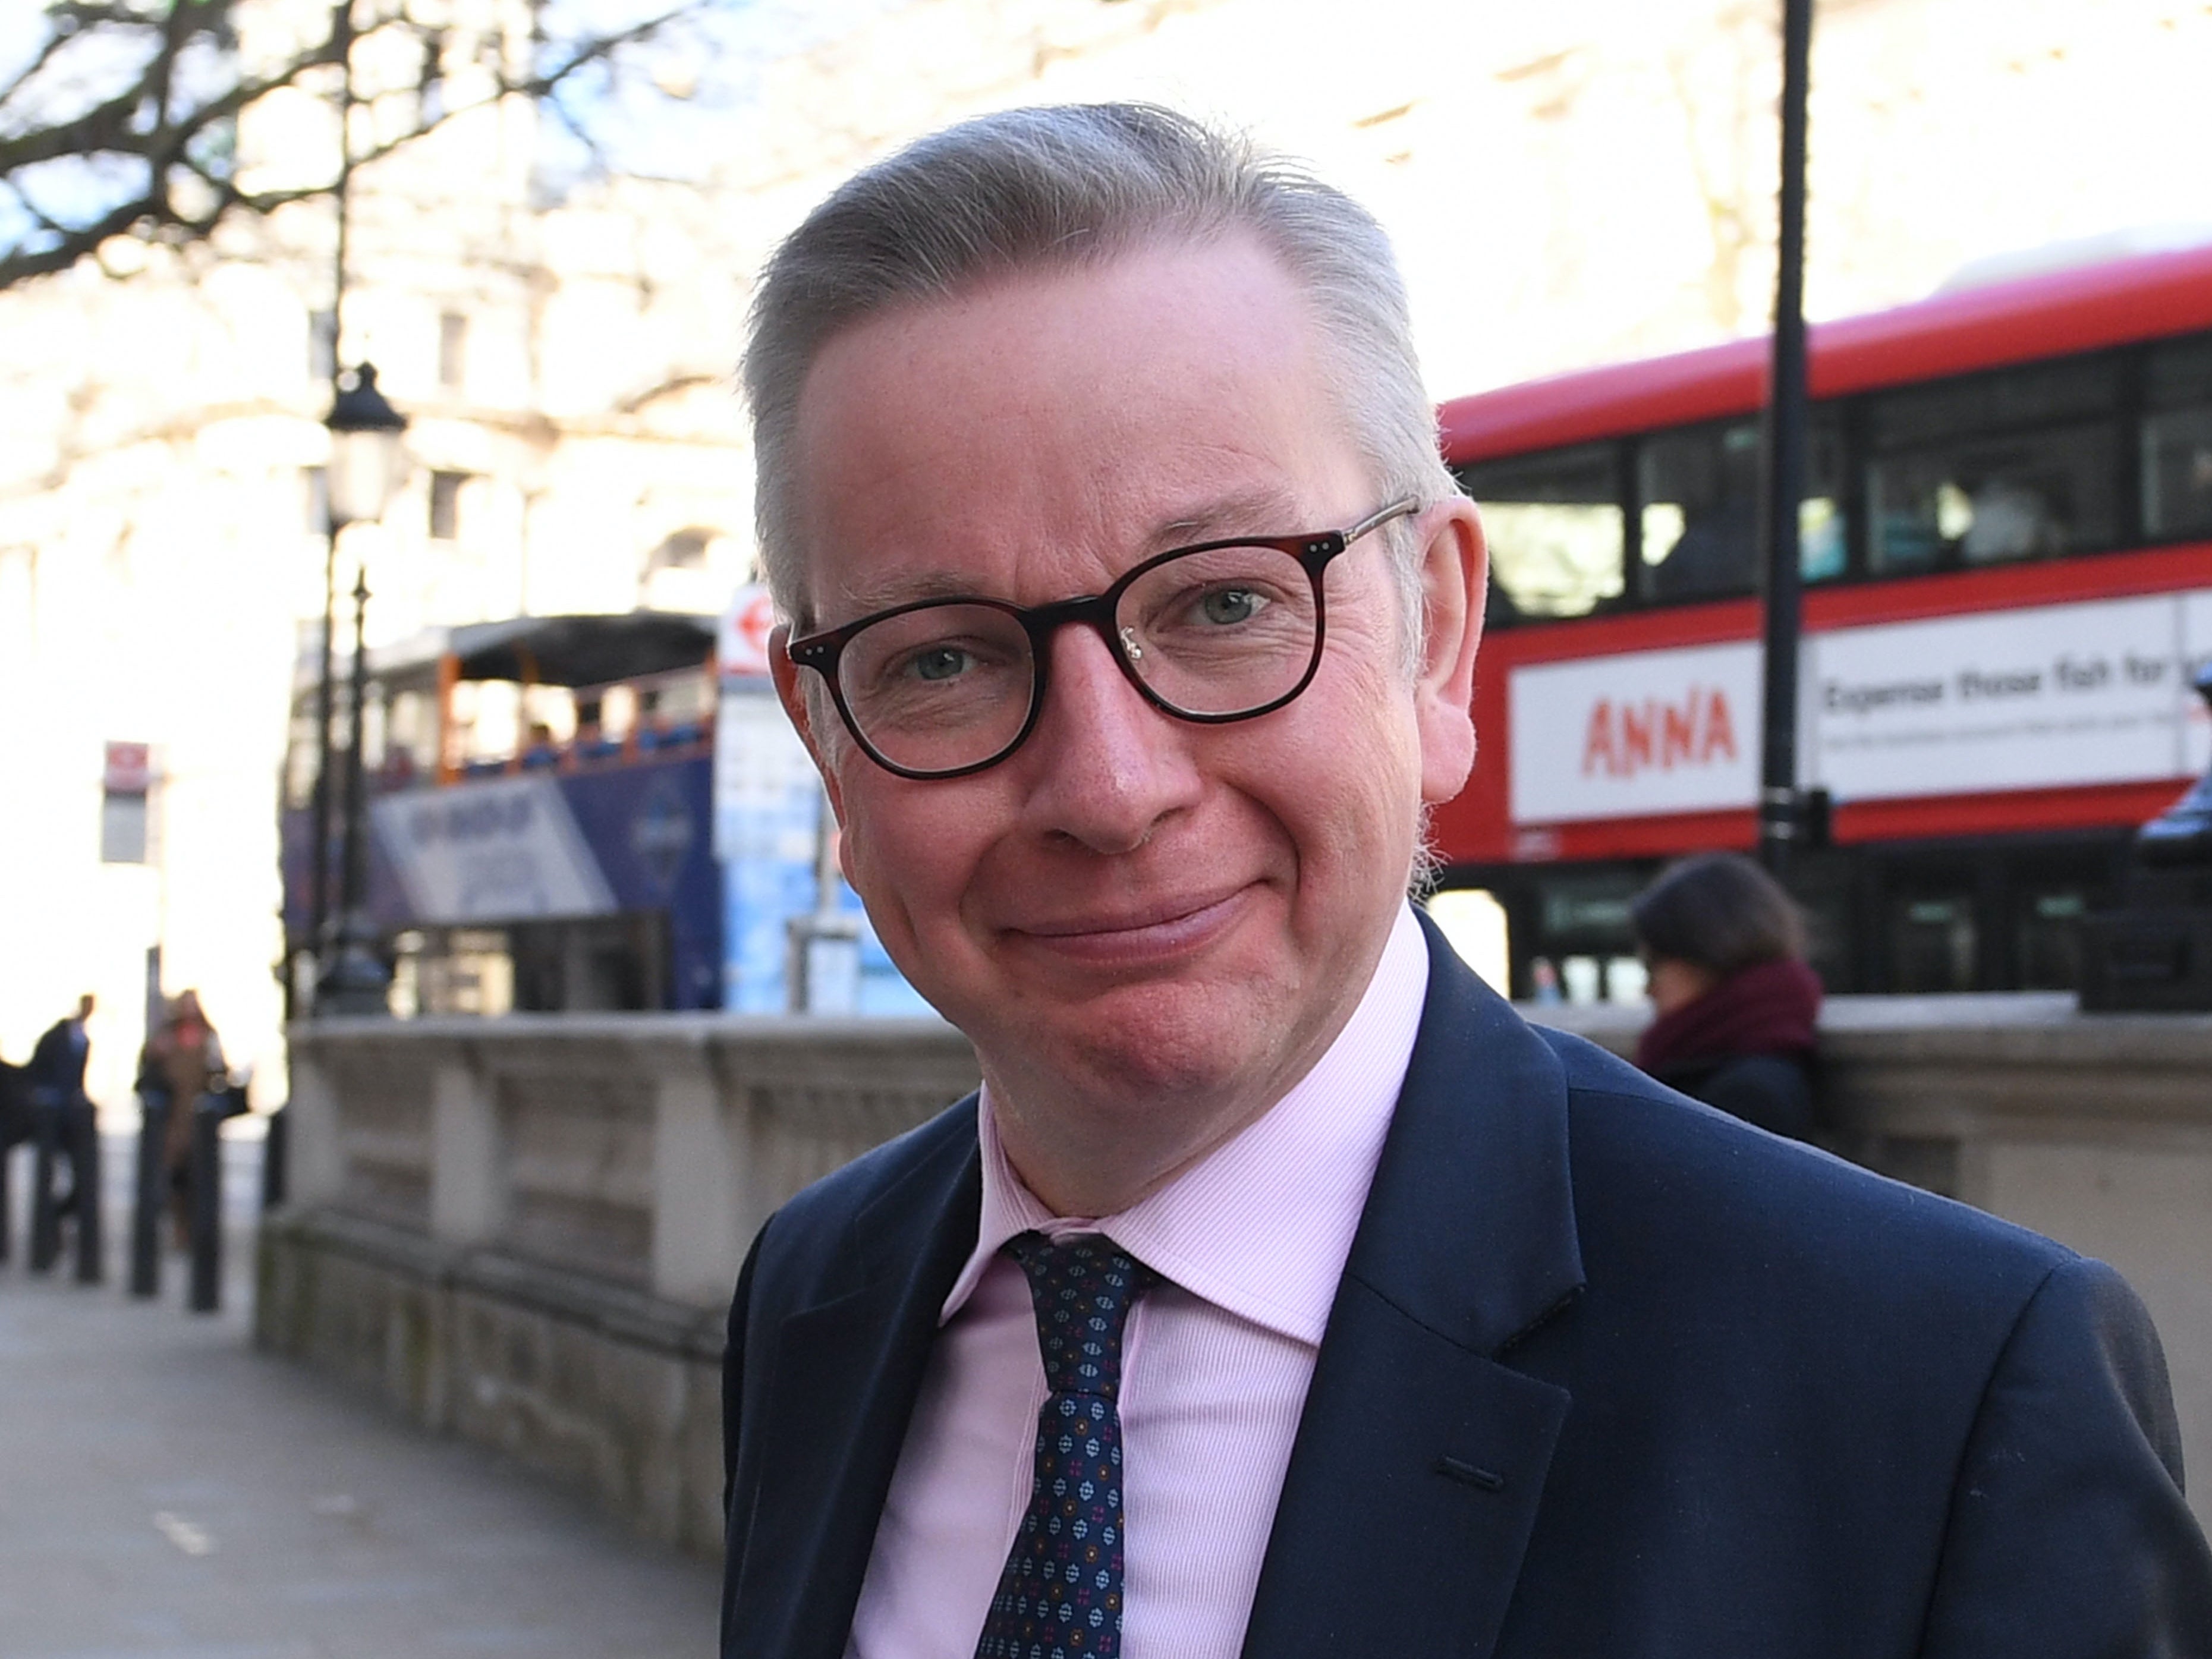 Instead of self-isolating for 10 days, Mr Gove will be able to take part in a pilot scheme for certain workplaces, whereby he can be tested every day for a week